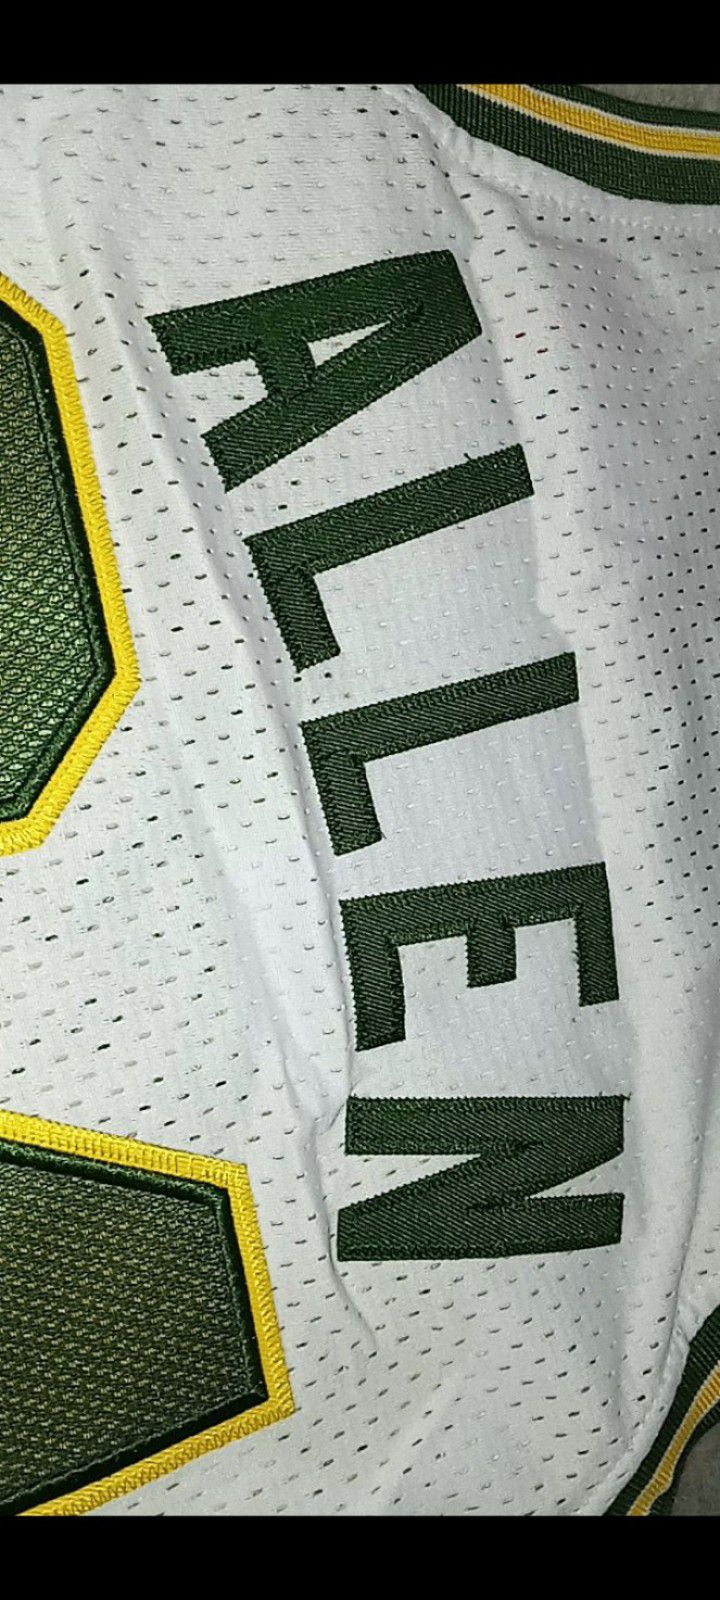 Authentic Seattle Sonics Ray Allen Jersey for Sale in Shoreline, WA -  OfferUp